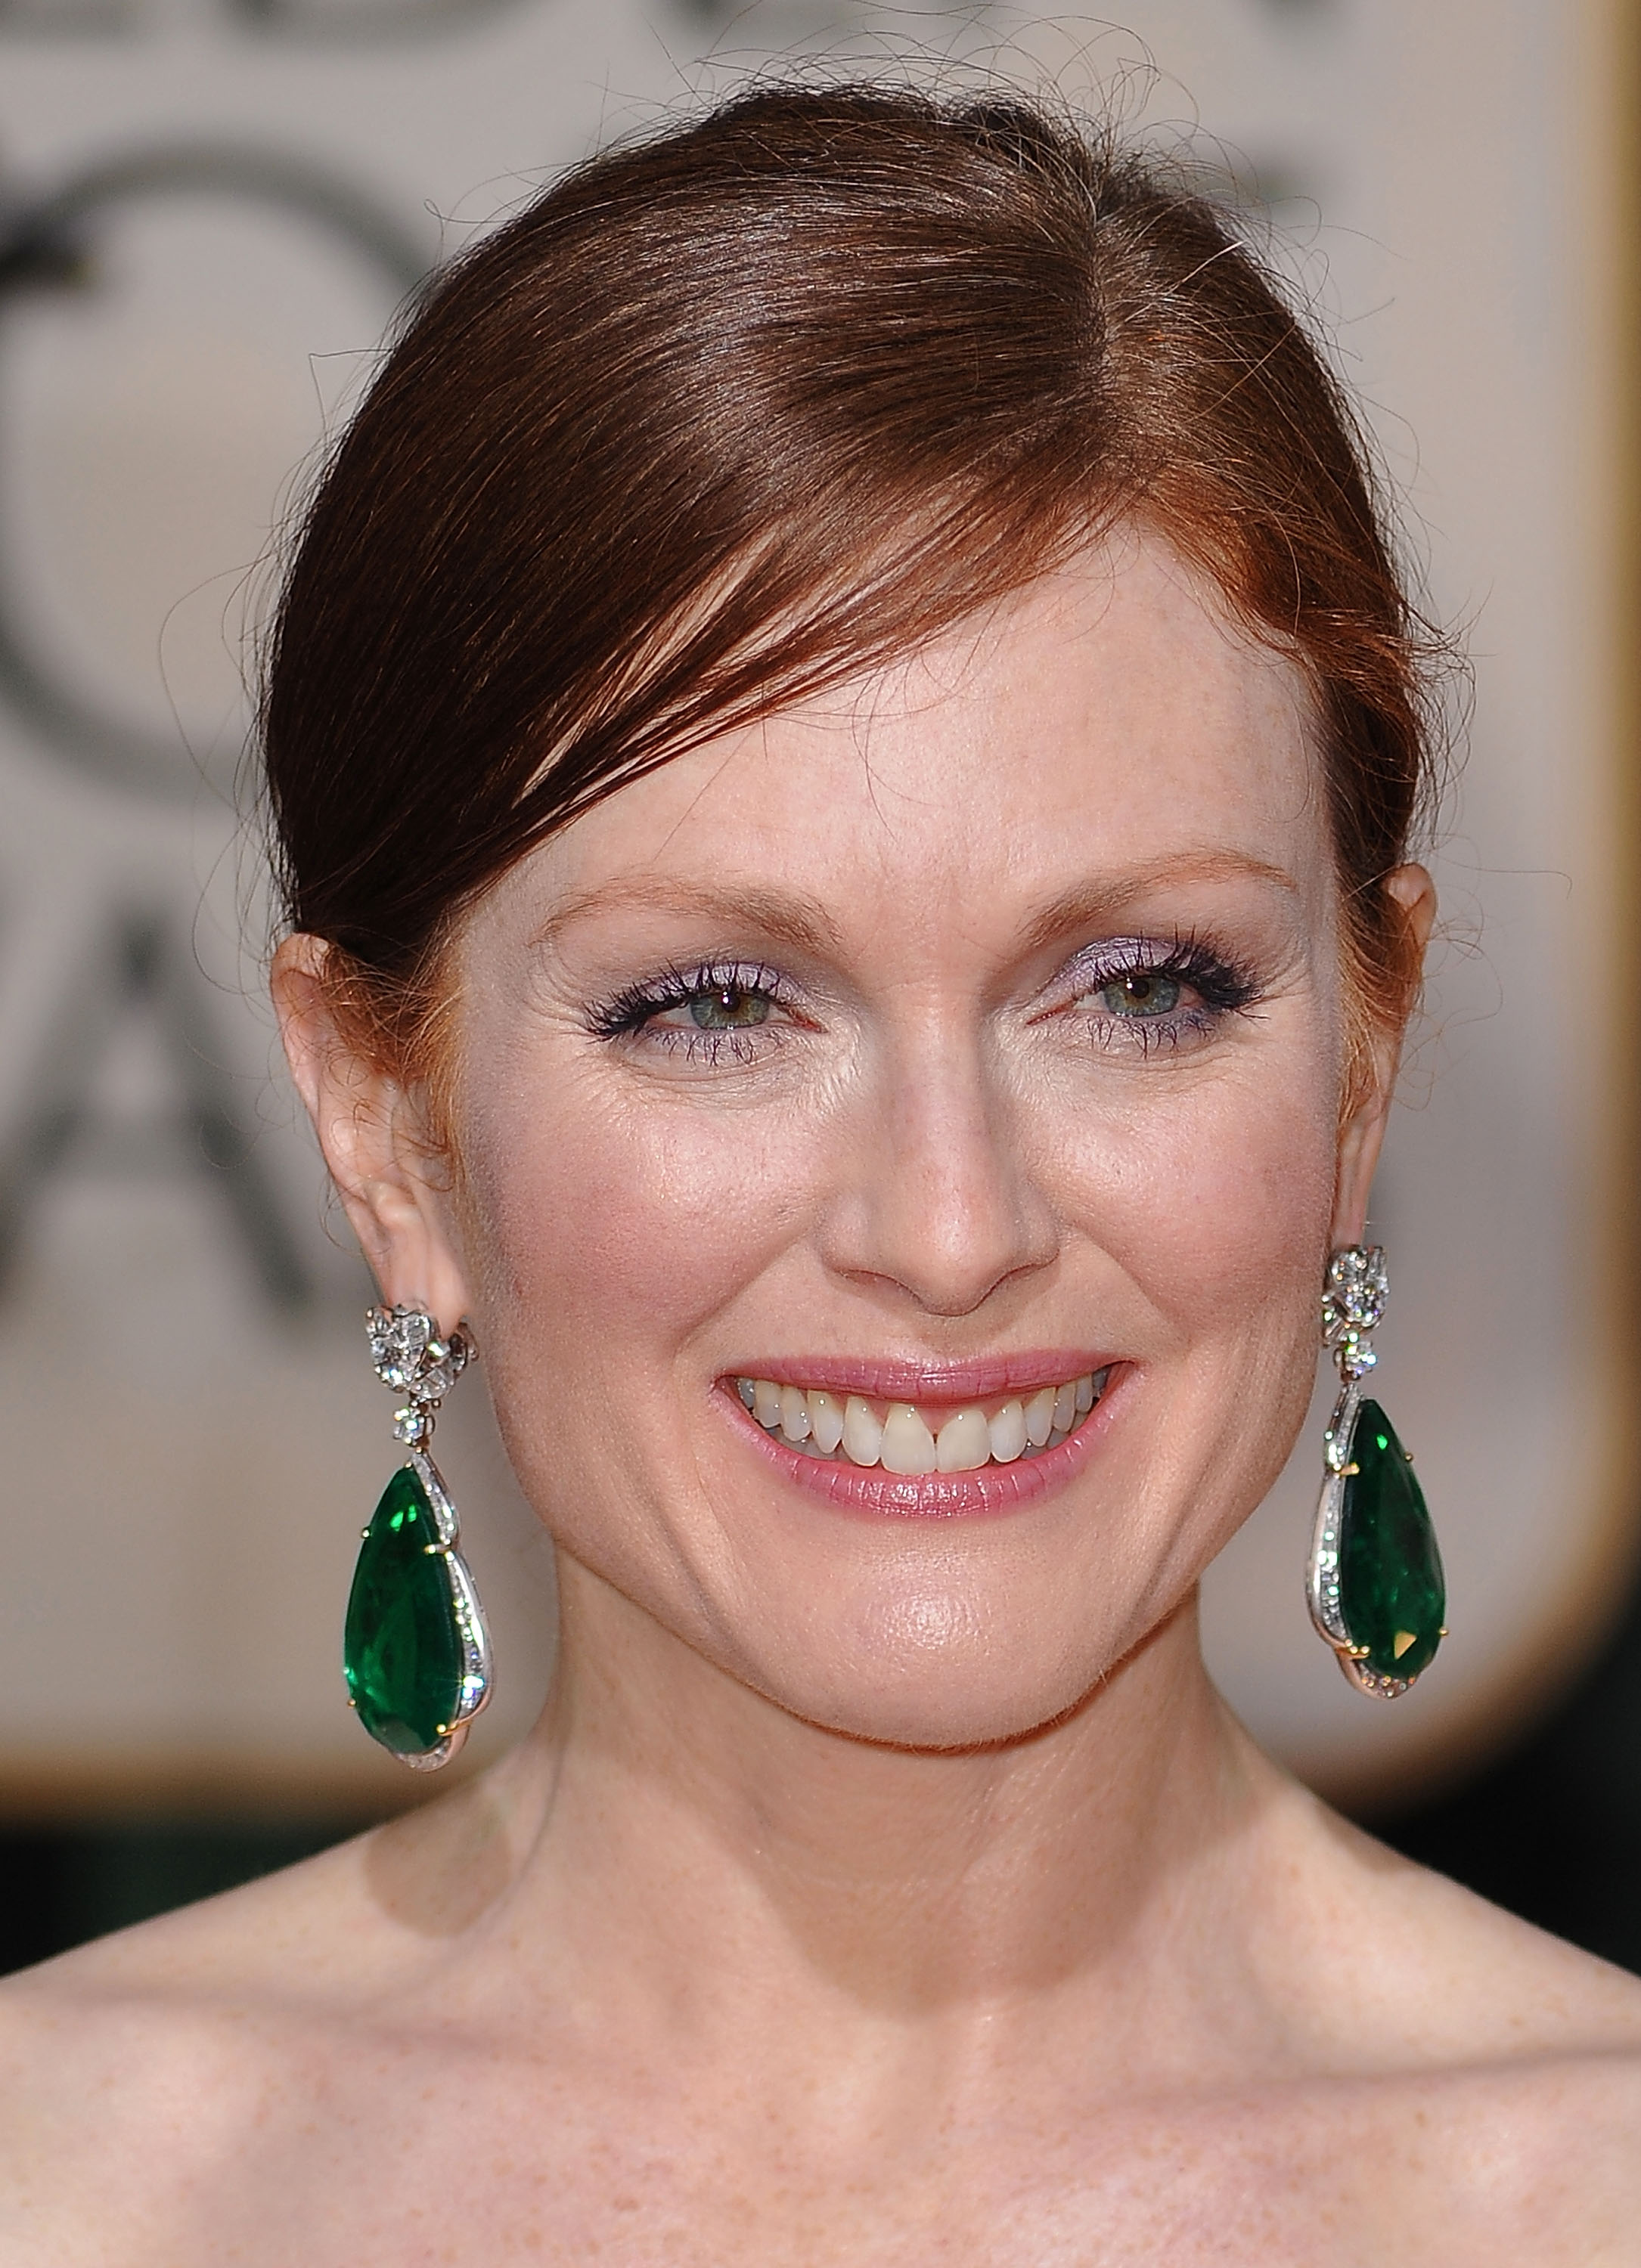 Julianne Moore on January 17, 2010 in Beverly Hills, California | Source: Getty Images